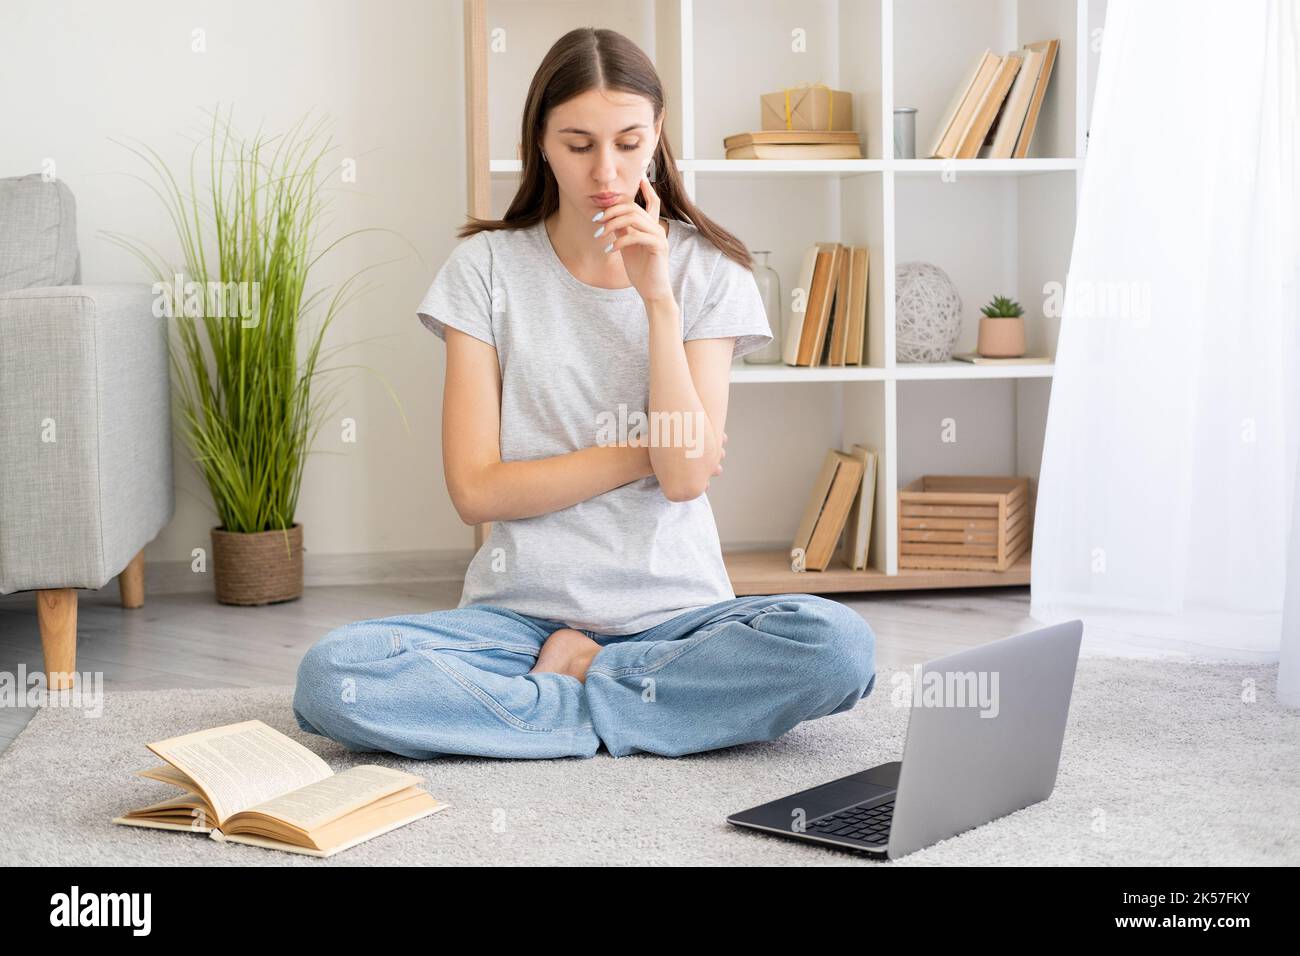 distance education considering woman online Stock Photo